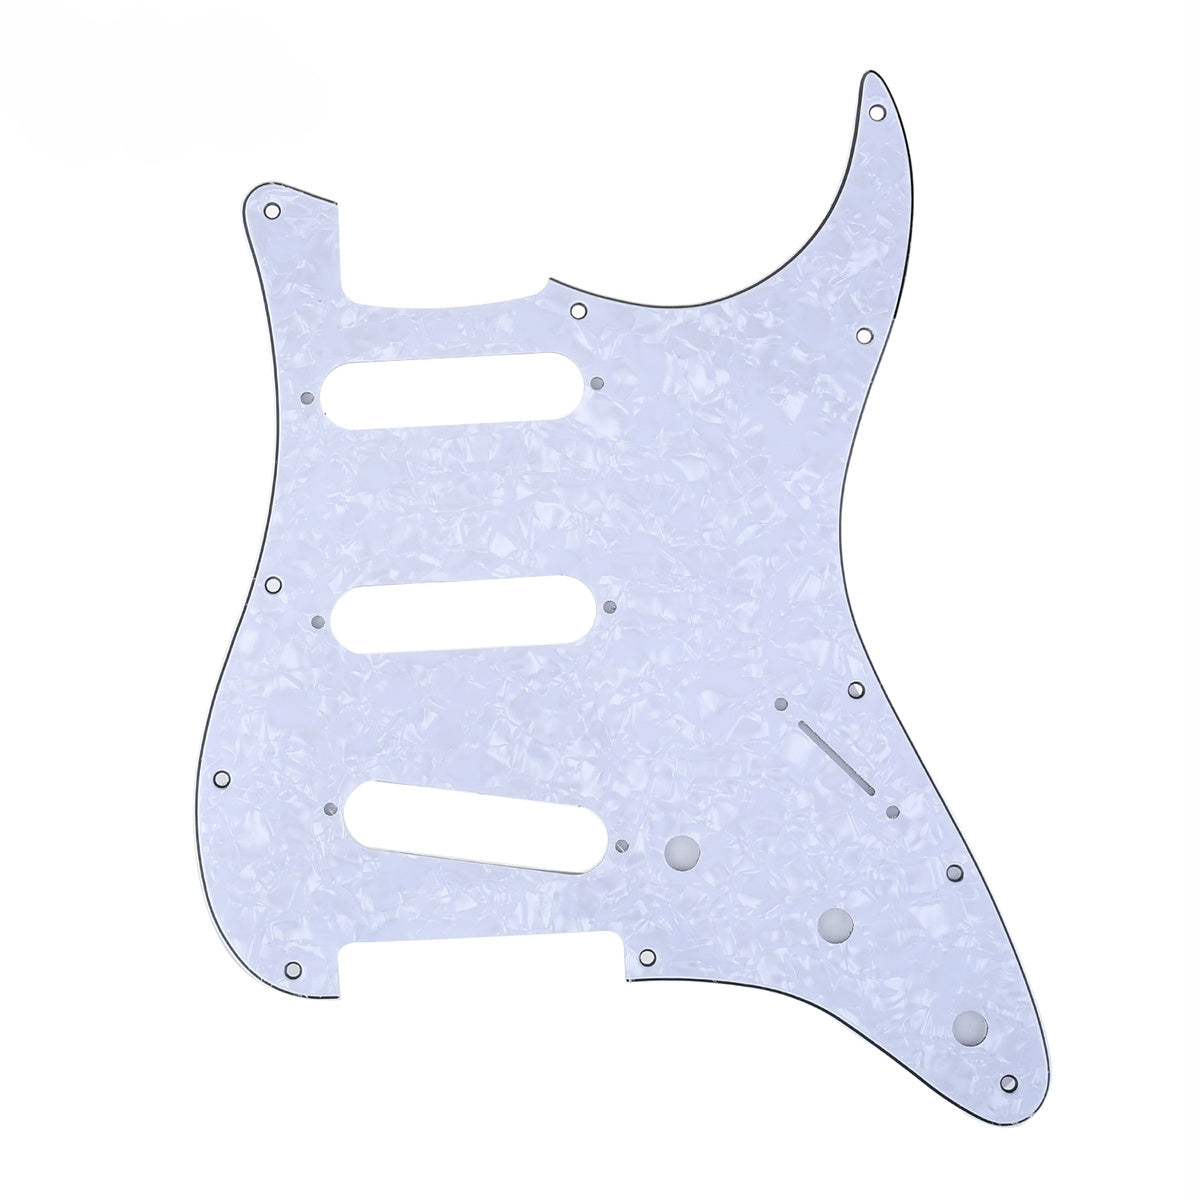 Musiclily SSS 11 Hole Strat Guitar Pickguard for Fender USA/Mexican Made Standard Stratocaster Modern Style, 4Ply White Pearl